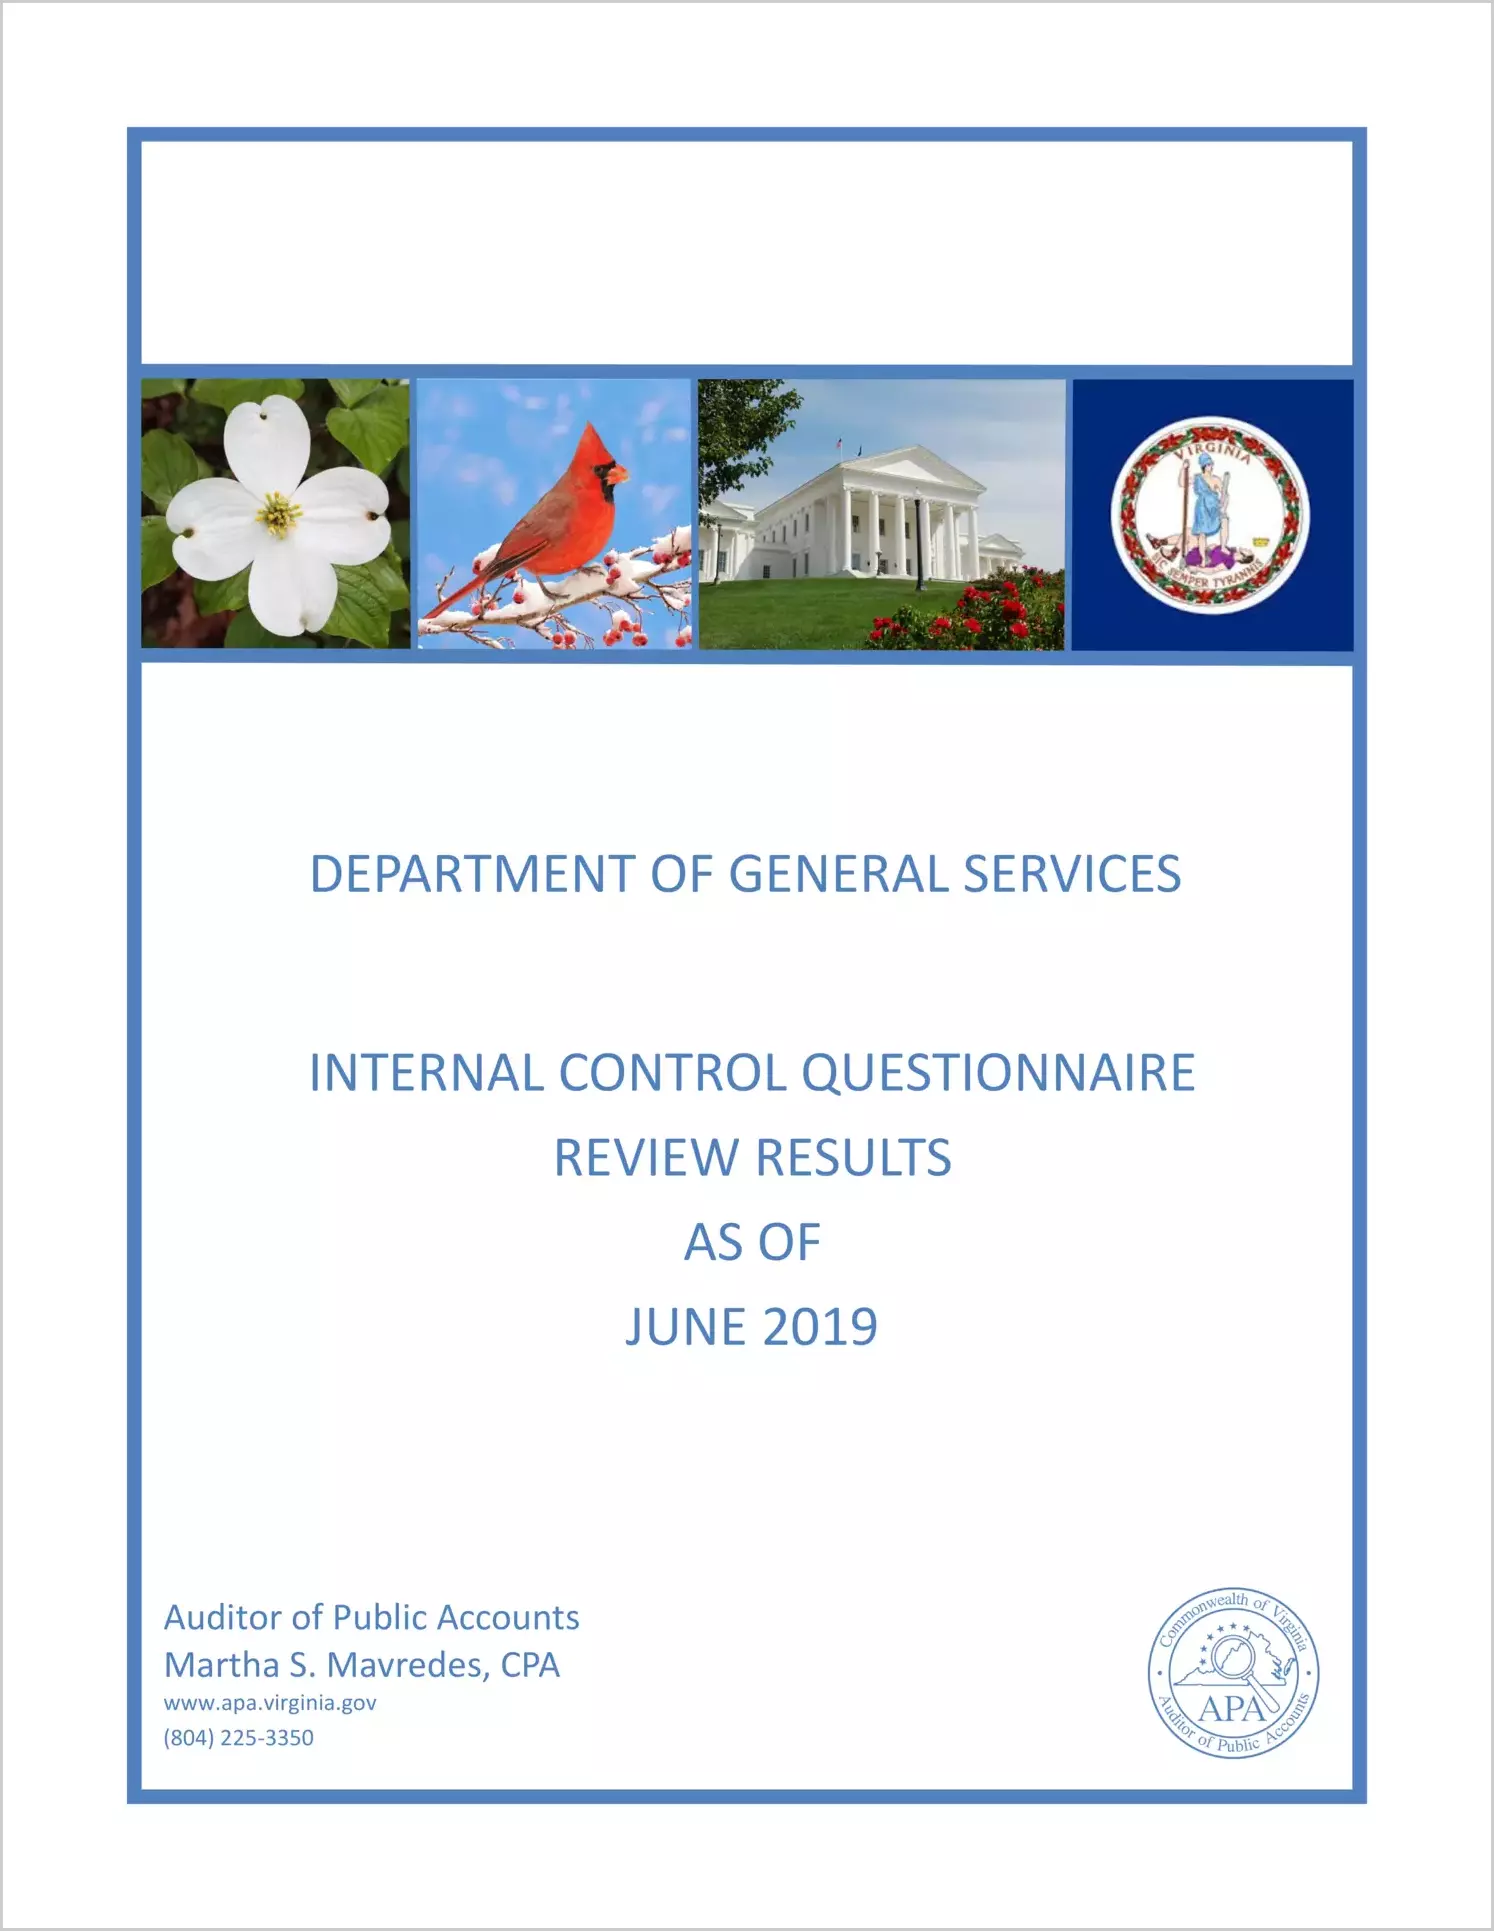 Department of General Services Internal Control Questionnaire Review Results as of June 2019